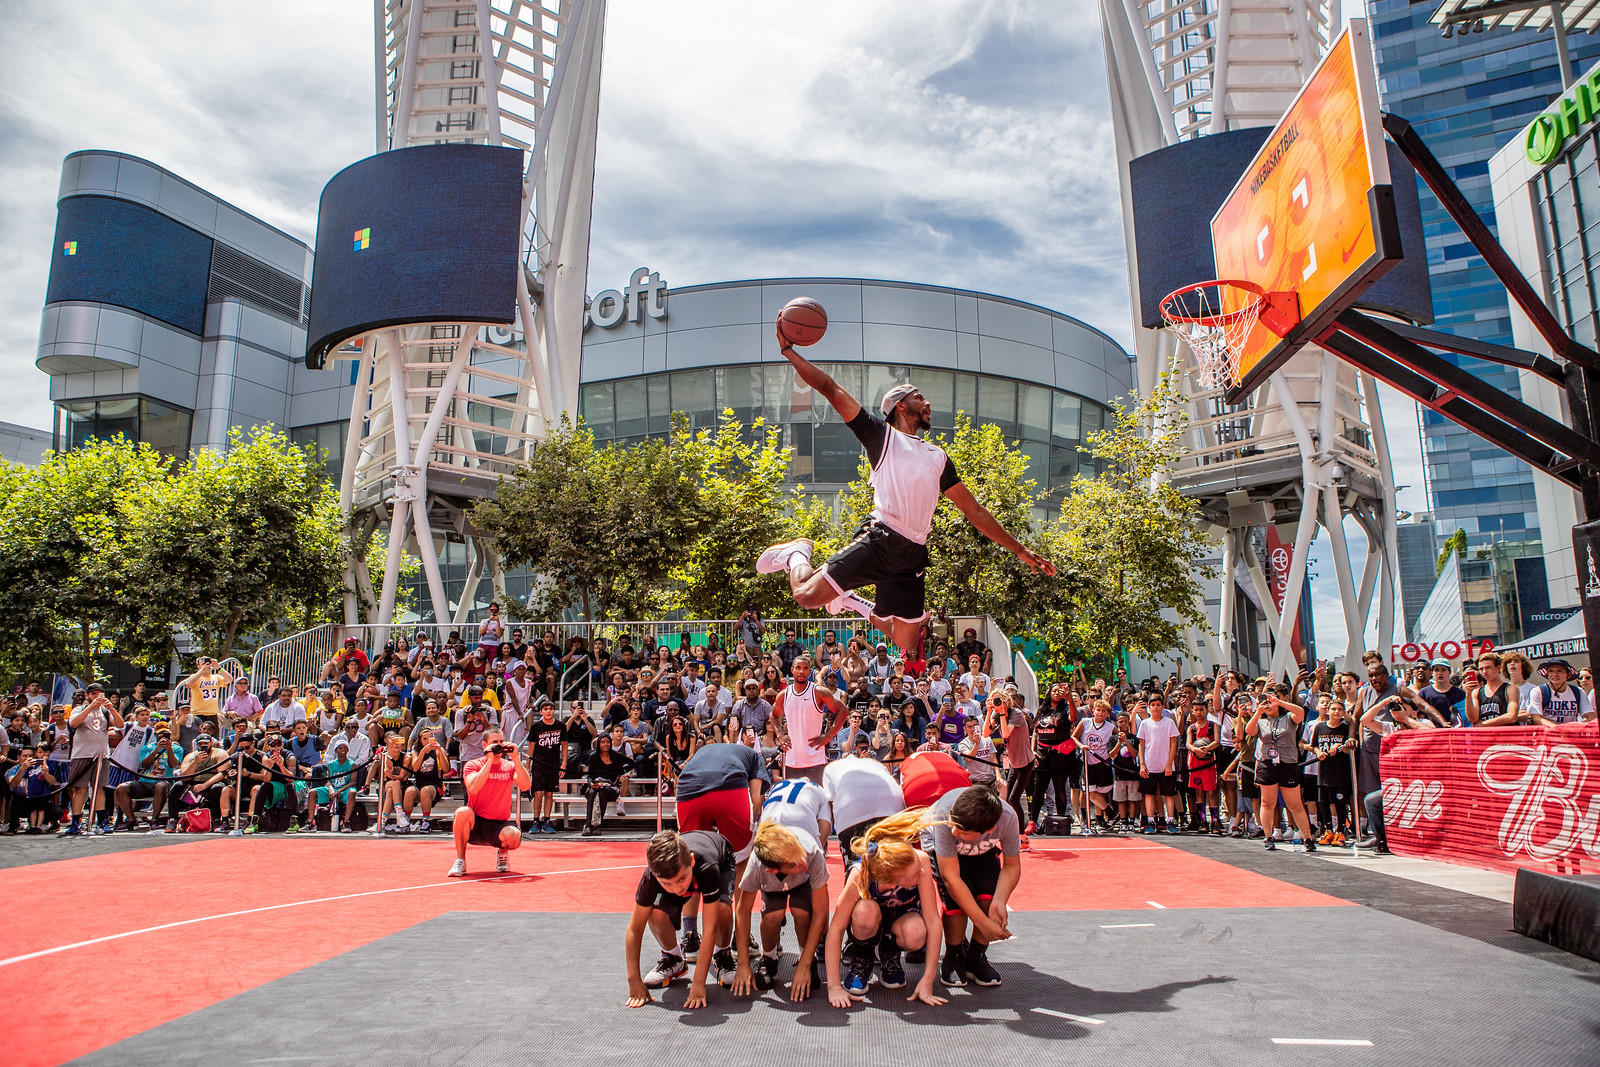 11th Annual Nike Basketball 3ON3 Tournament at L.A